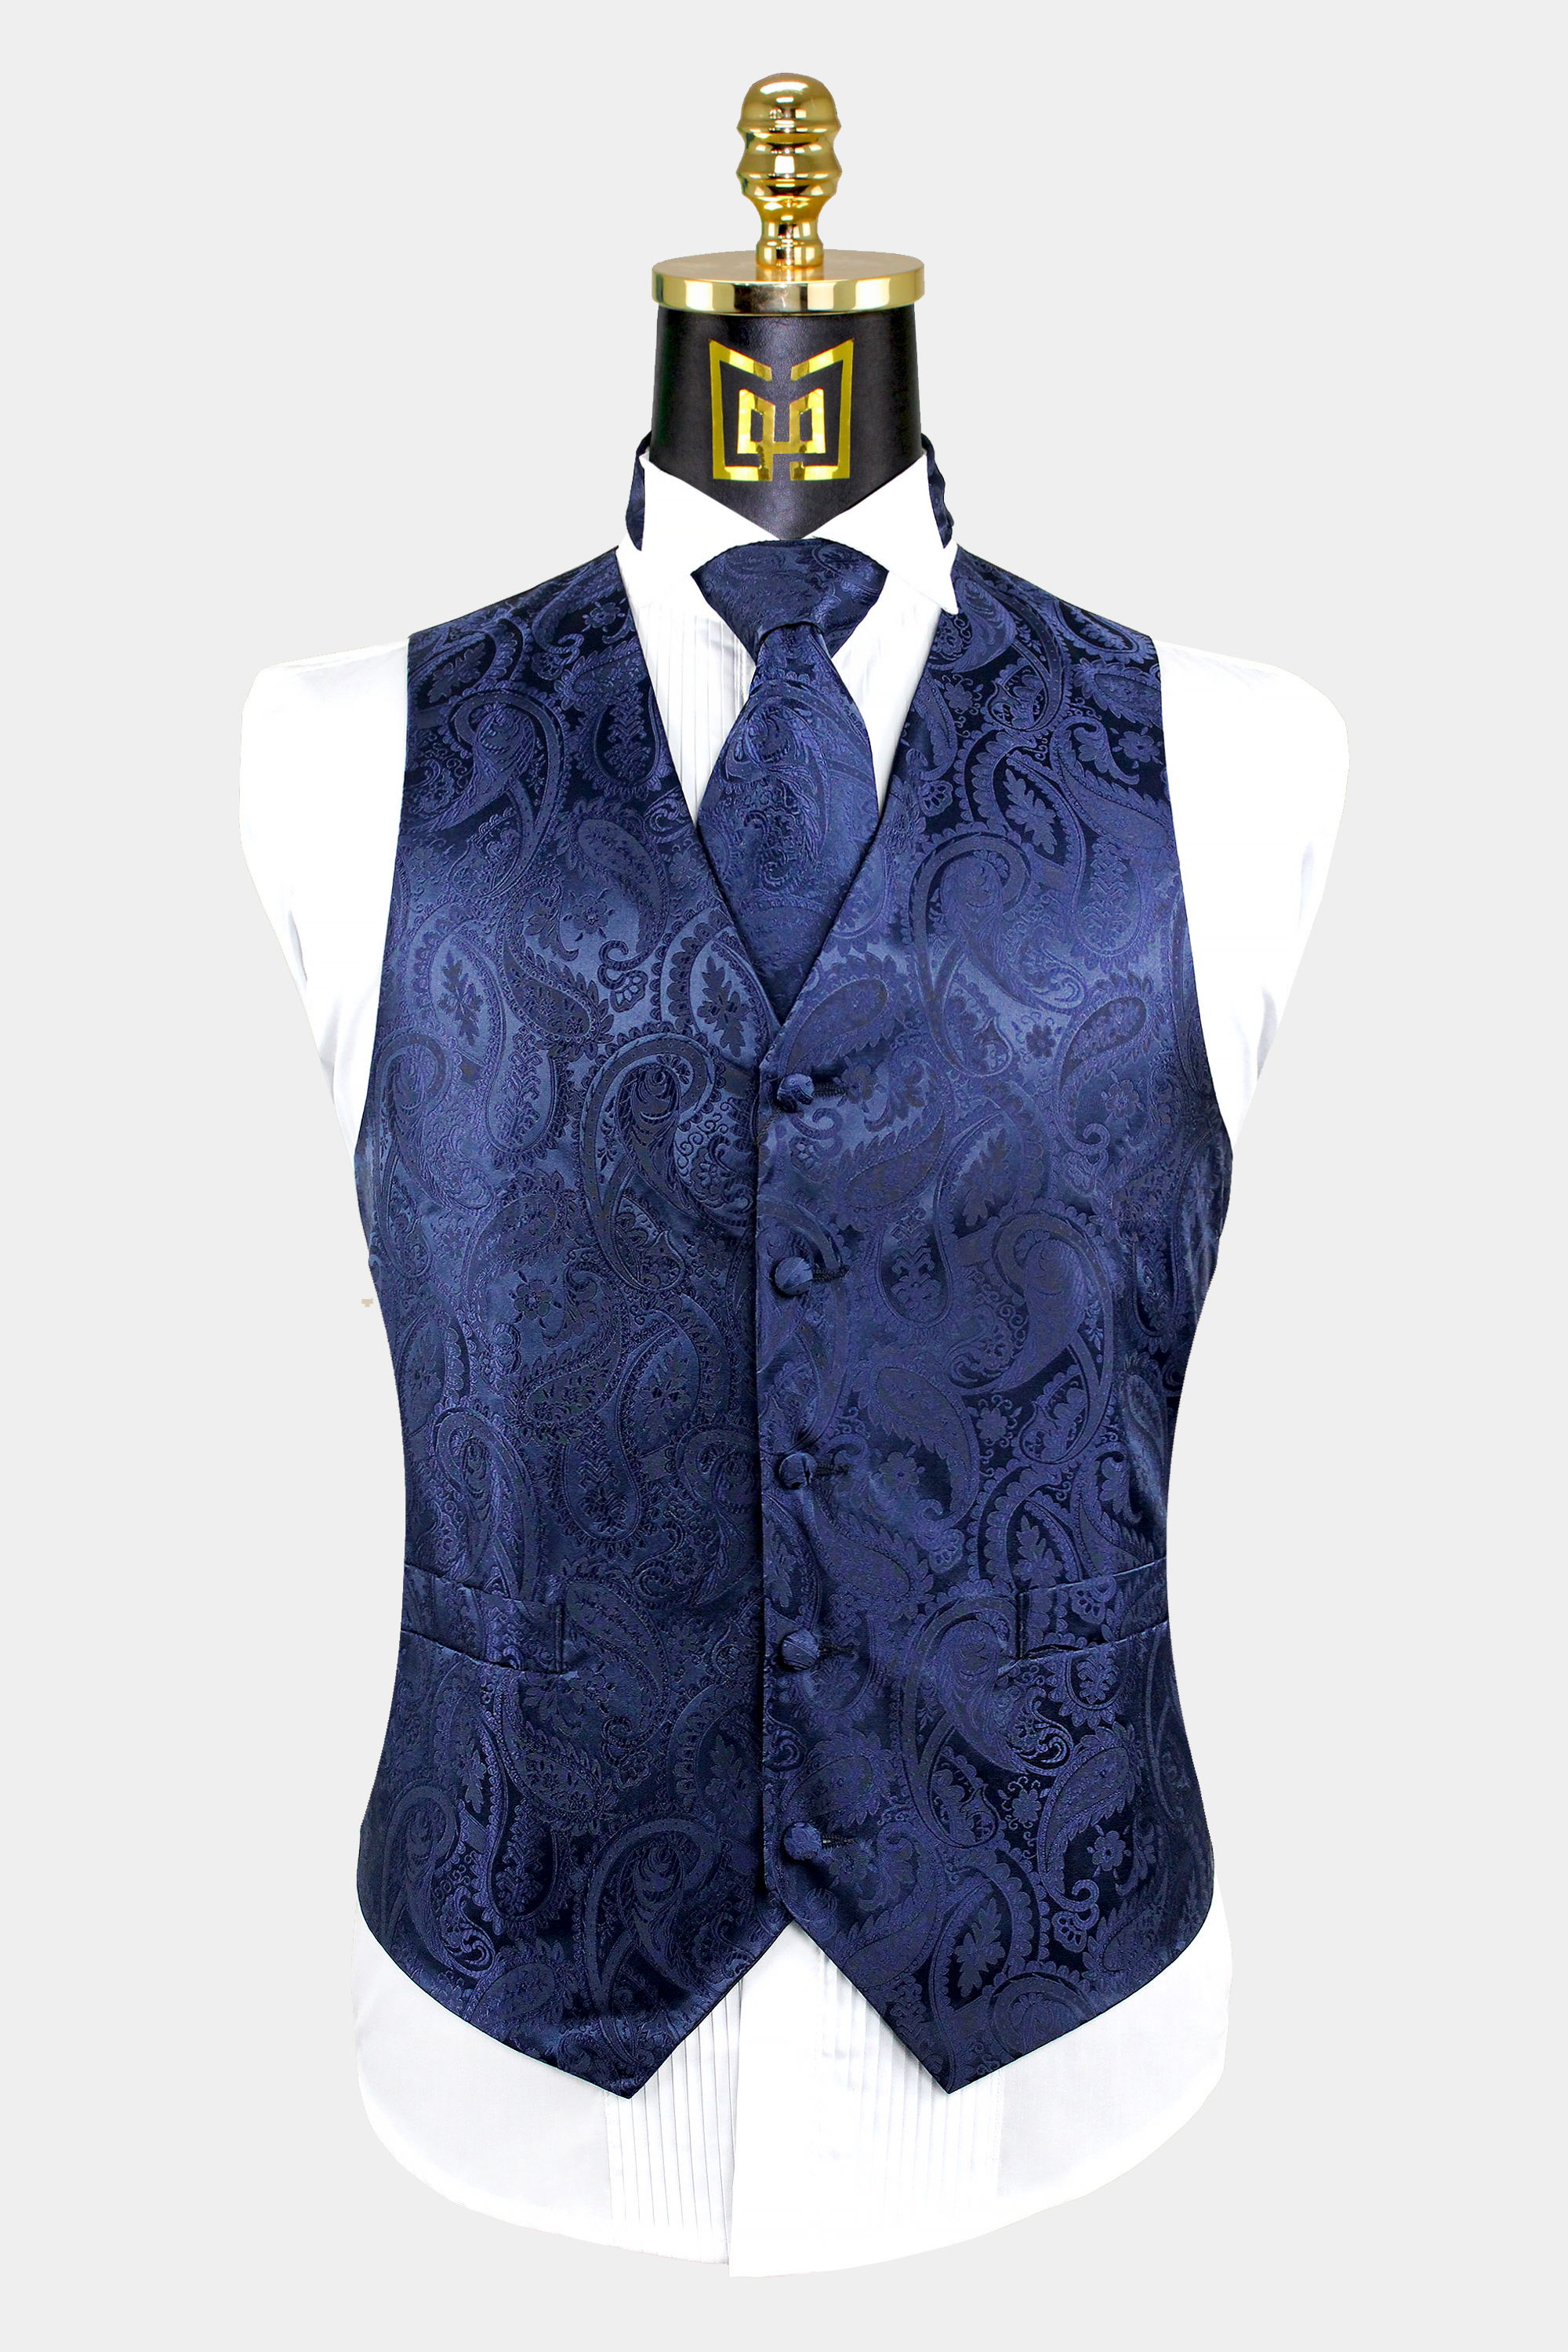 Waistcoat Necktie and Pocket Square Cufflinks Big and Tall Mens Wedding Paisley Suit Vest 